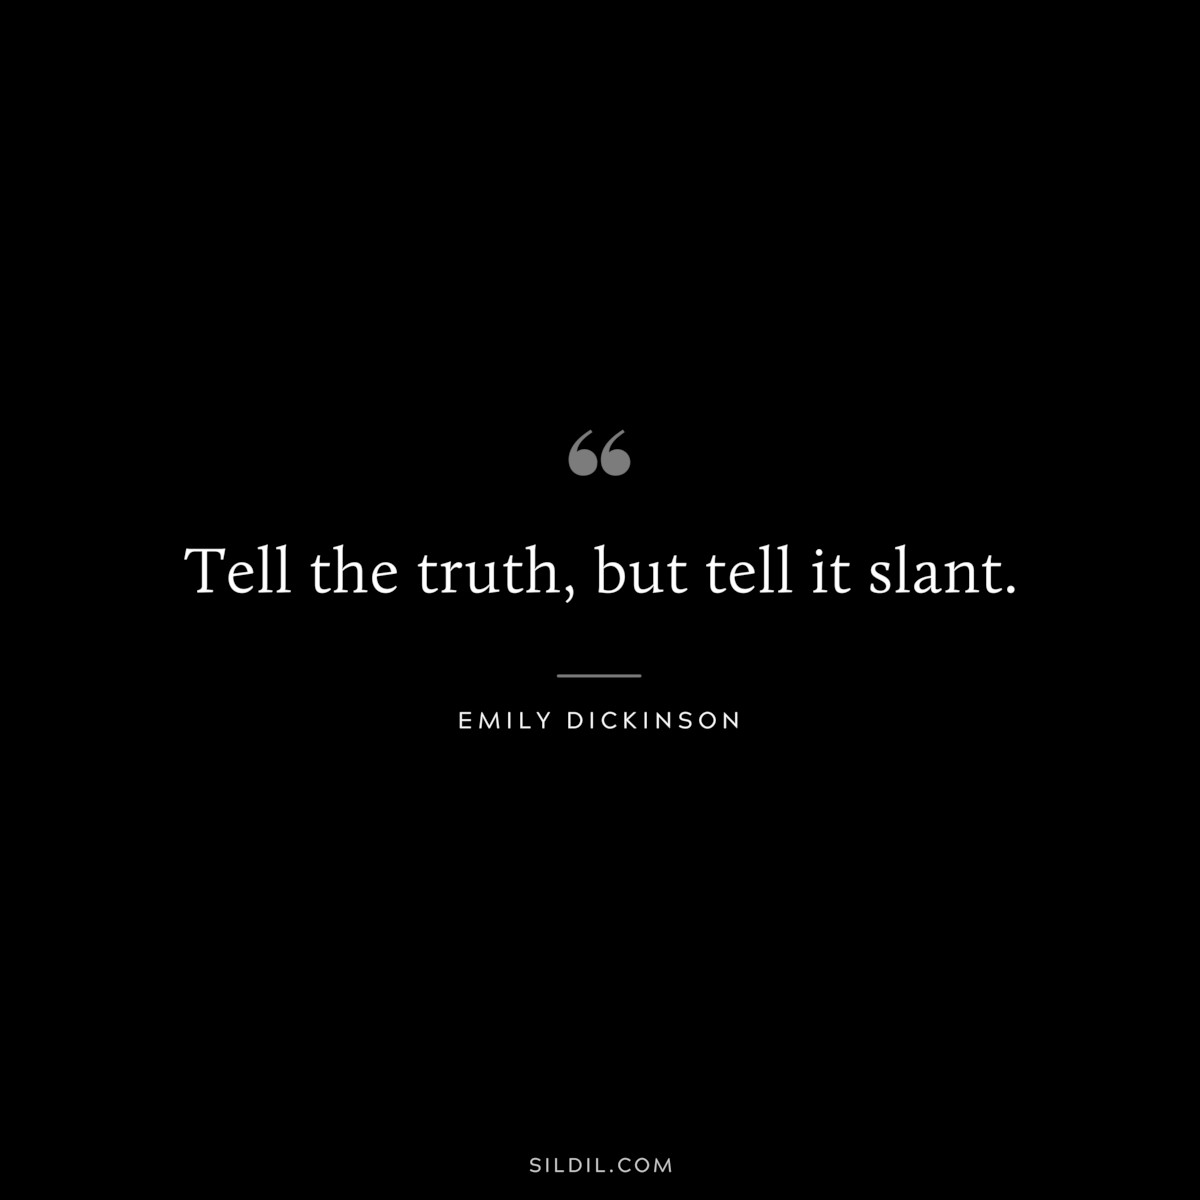 Tell the truth, but tell it slant.